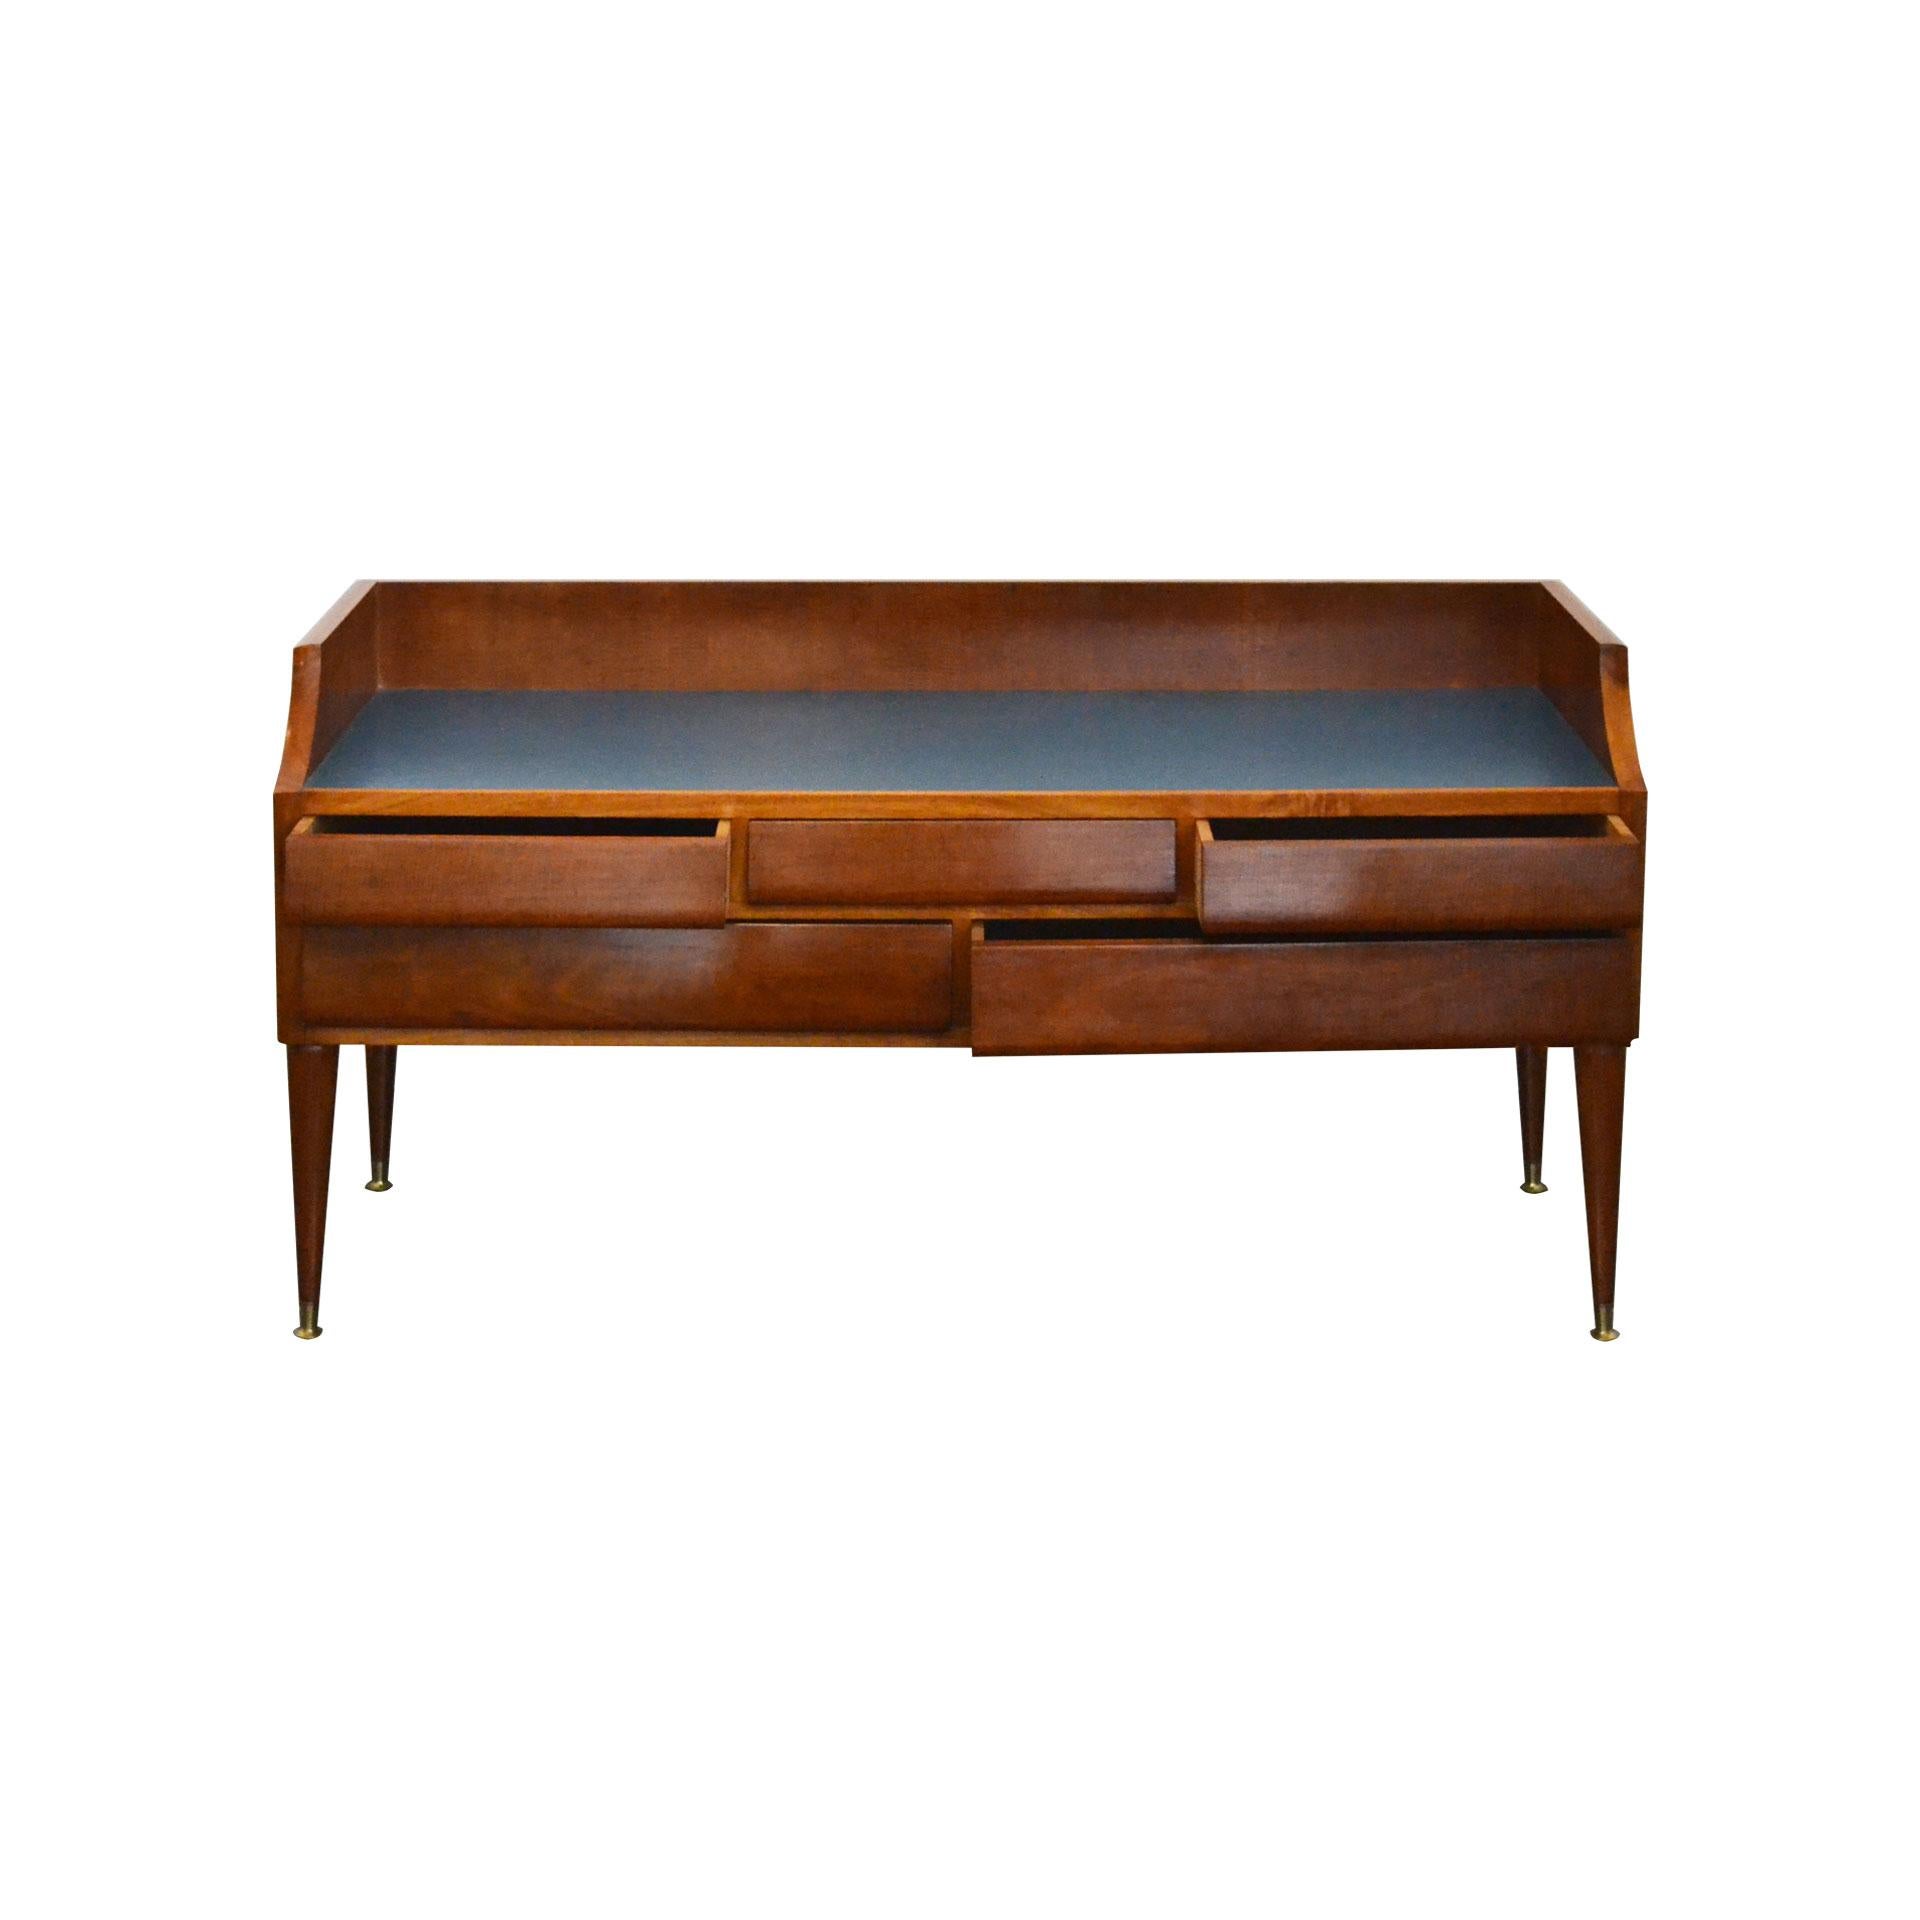 Sideboard designed in 1950s in the style of Gio Ponti with structure in wood, top in lacquered wood and details in the feet in brass. Completely restored, very good condition.